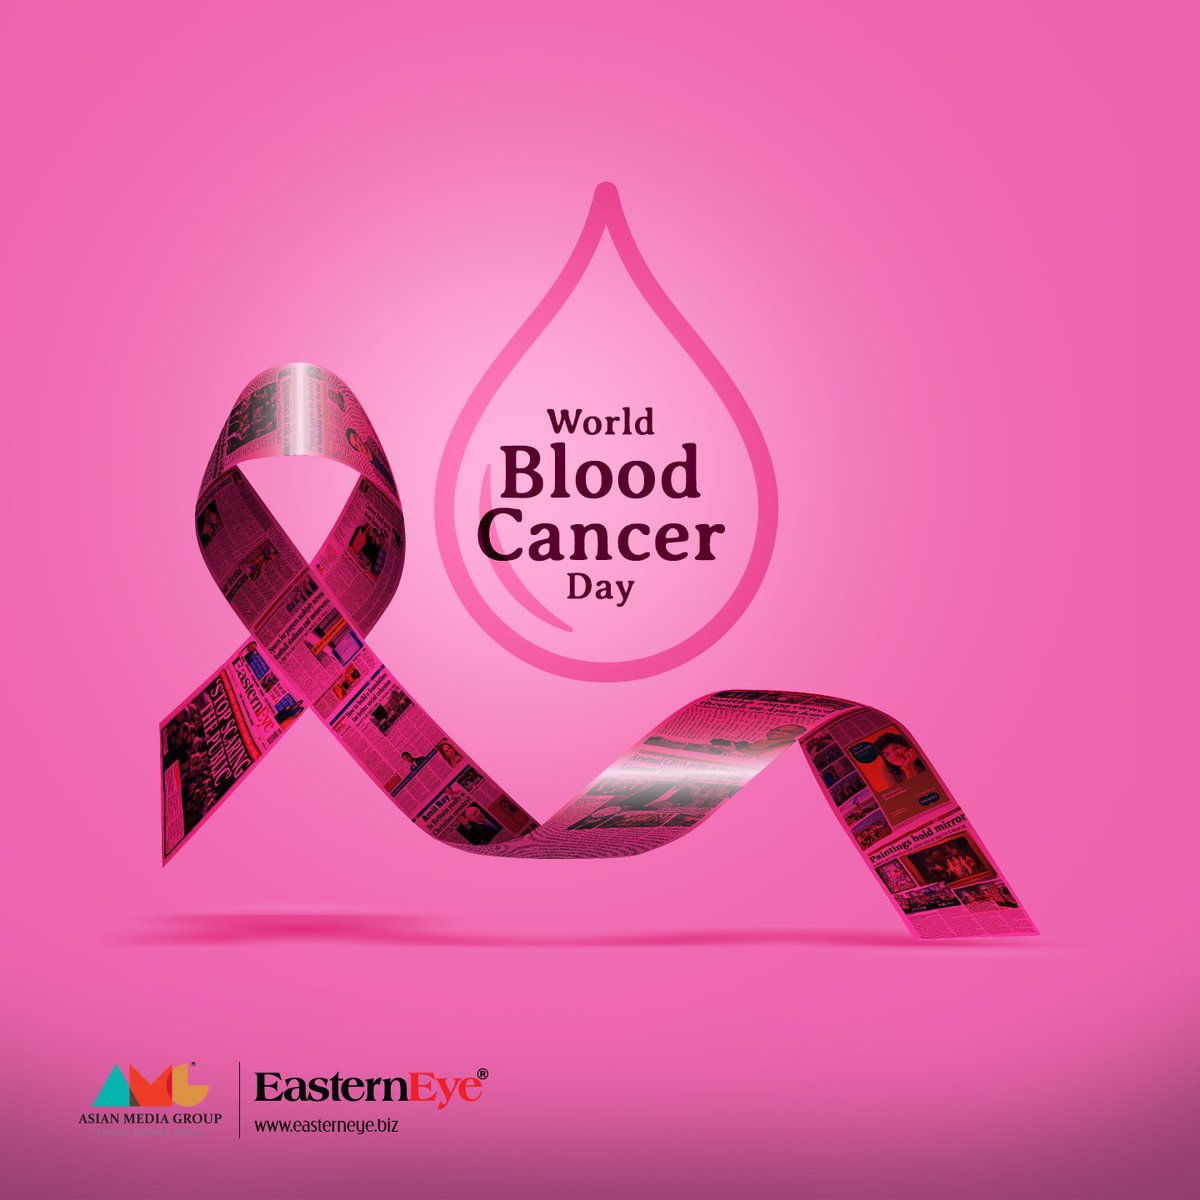 Every action counts. This World Blood Cancer Day, donate blood, spread awareness, and support those affected by blood cancer.
Each story shared raises awareness and brings us closer to a cure.

#WorldCancerDay2024 #EasternEye